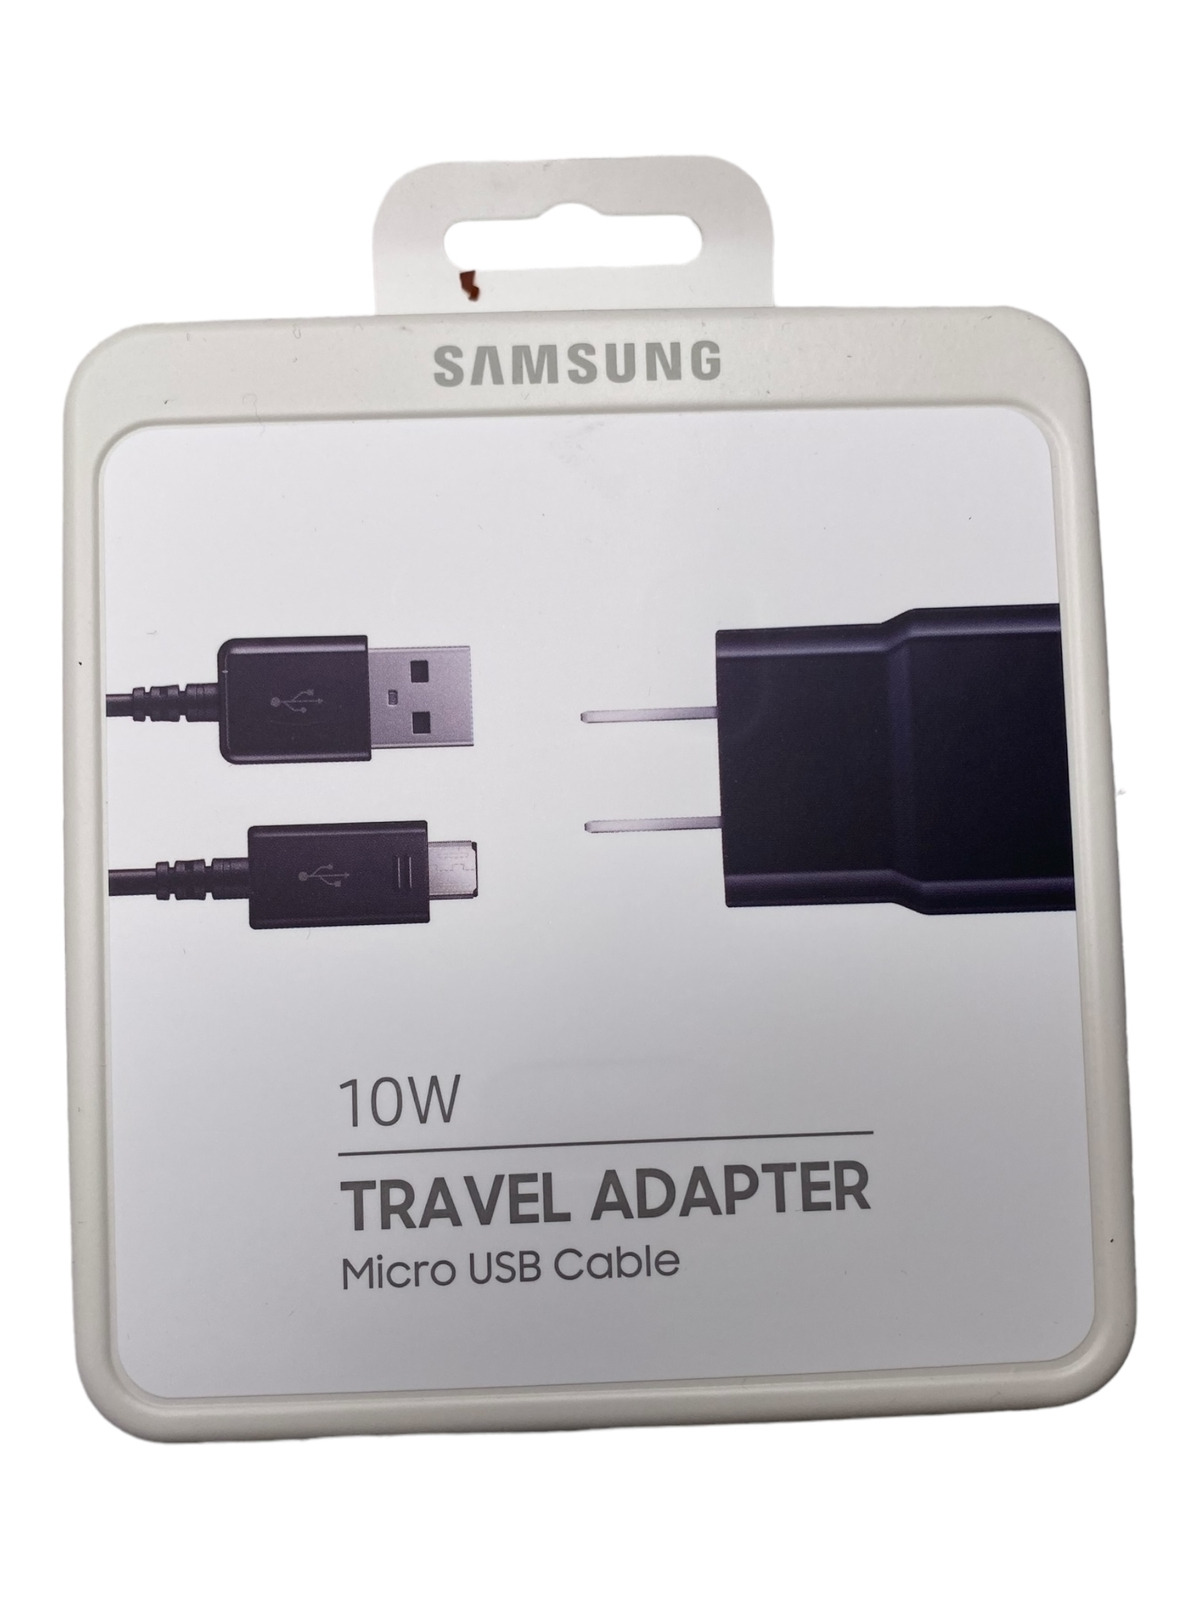 New Lot of 10 Samsung Travel Adapter Wall Charger with Micro UCB Cable white